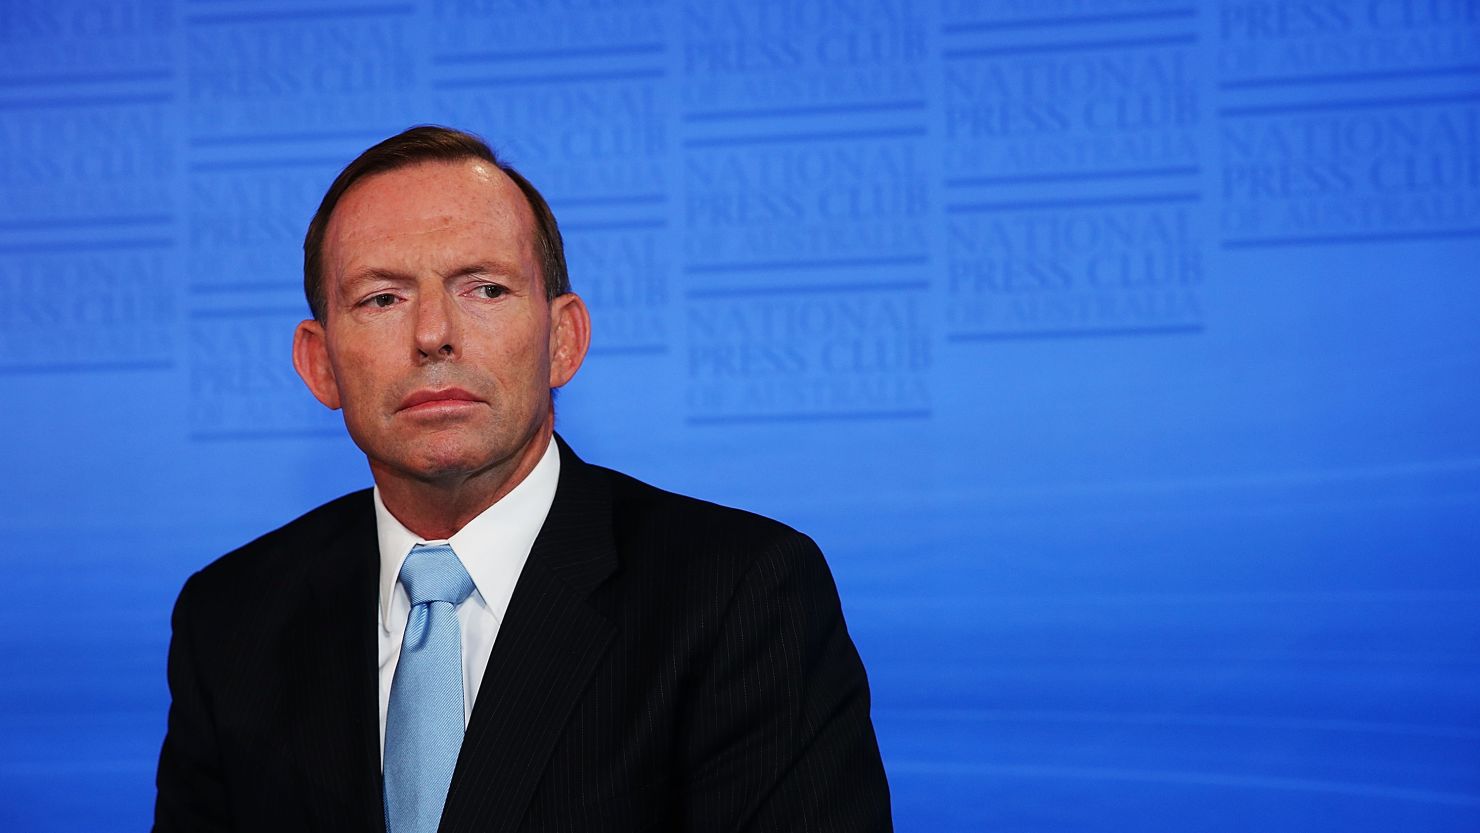 Prime Minister Tony Abbott prepares to speak at the National Press Club on February 2, 2015 in Canberra.